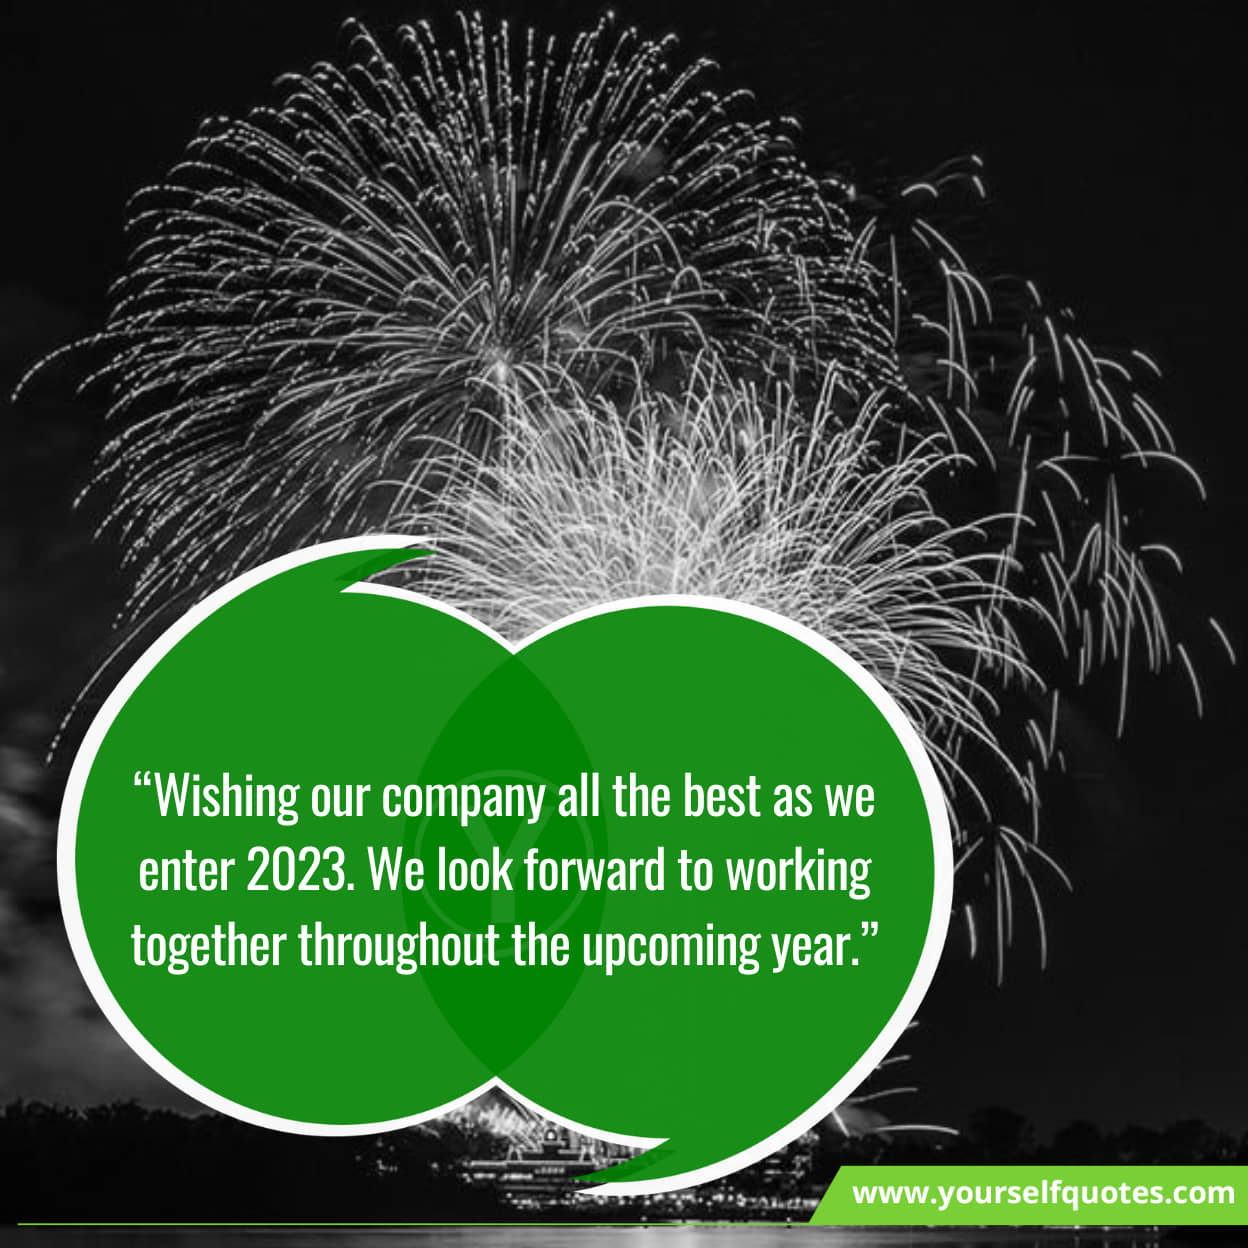 Inspirational New Year Greetings for Business